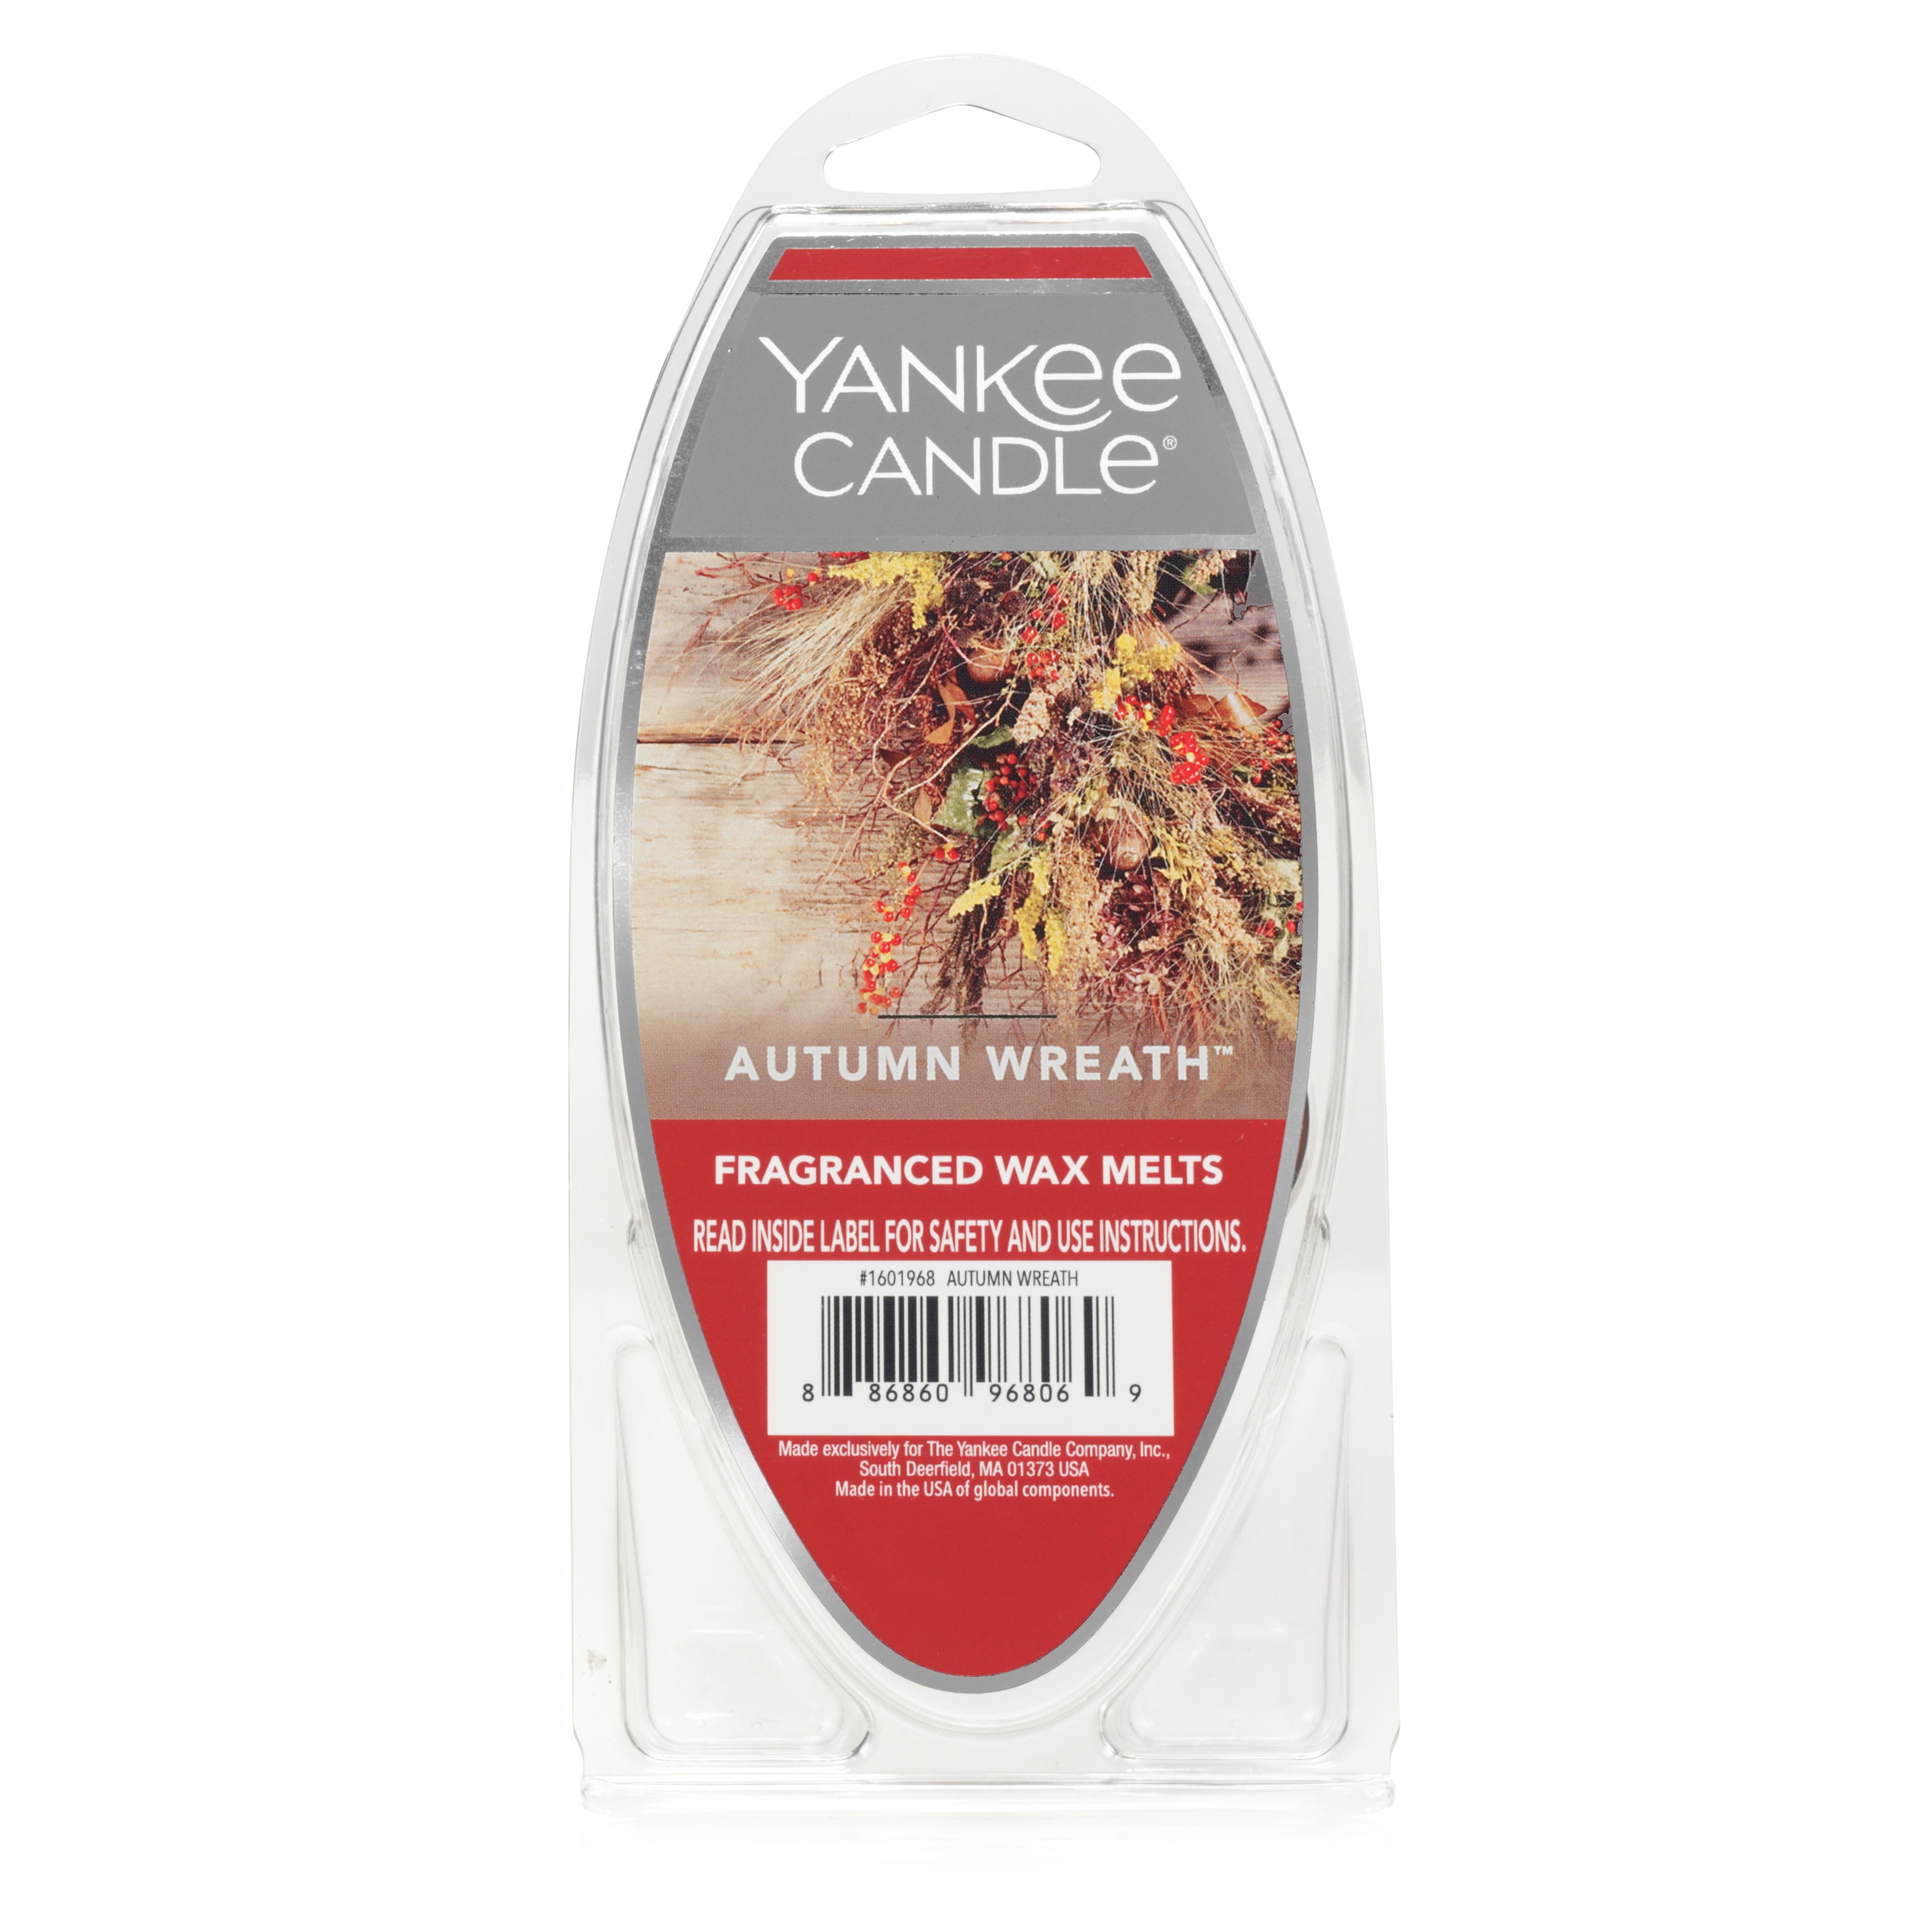 Yankee Candle Pink Sands - Wax Melt (Single Pack) 